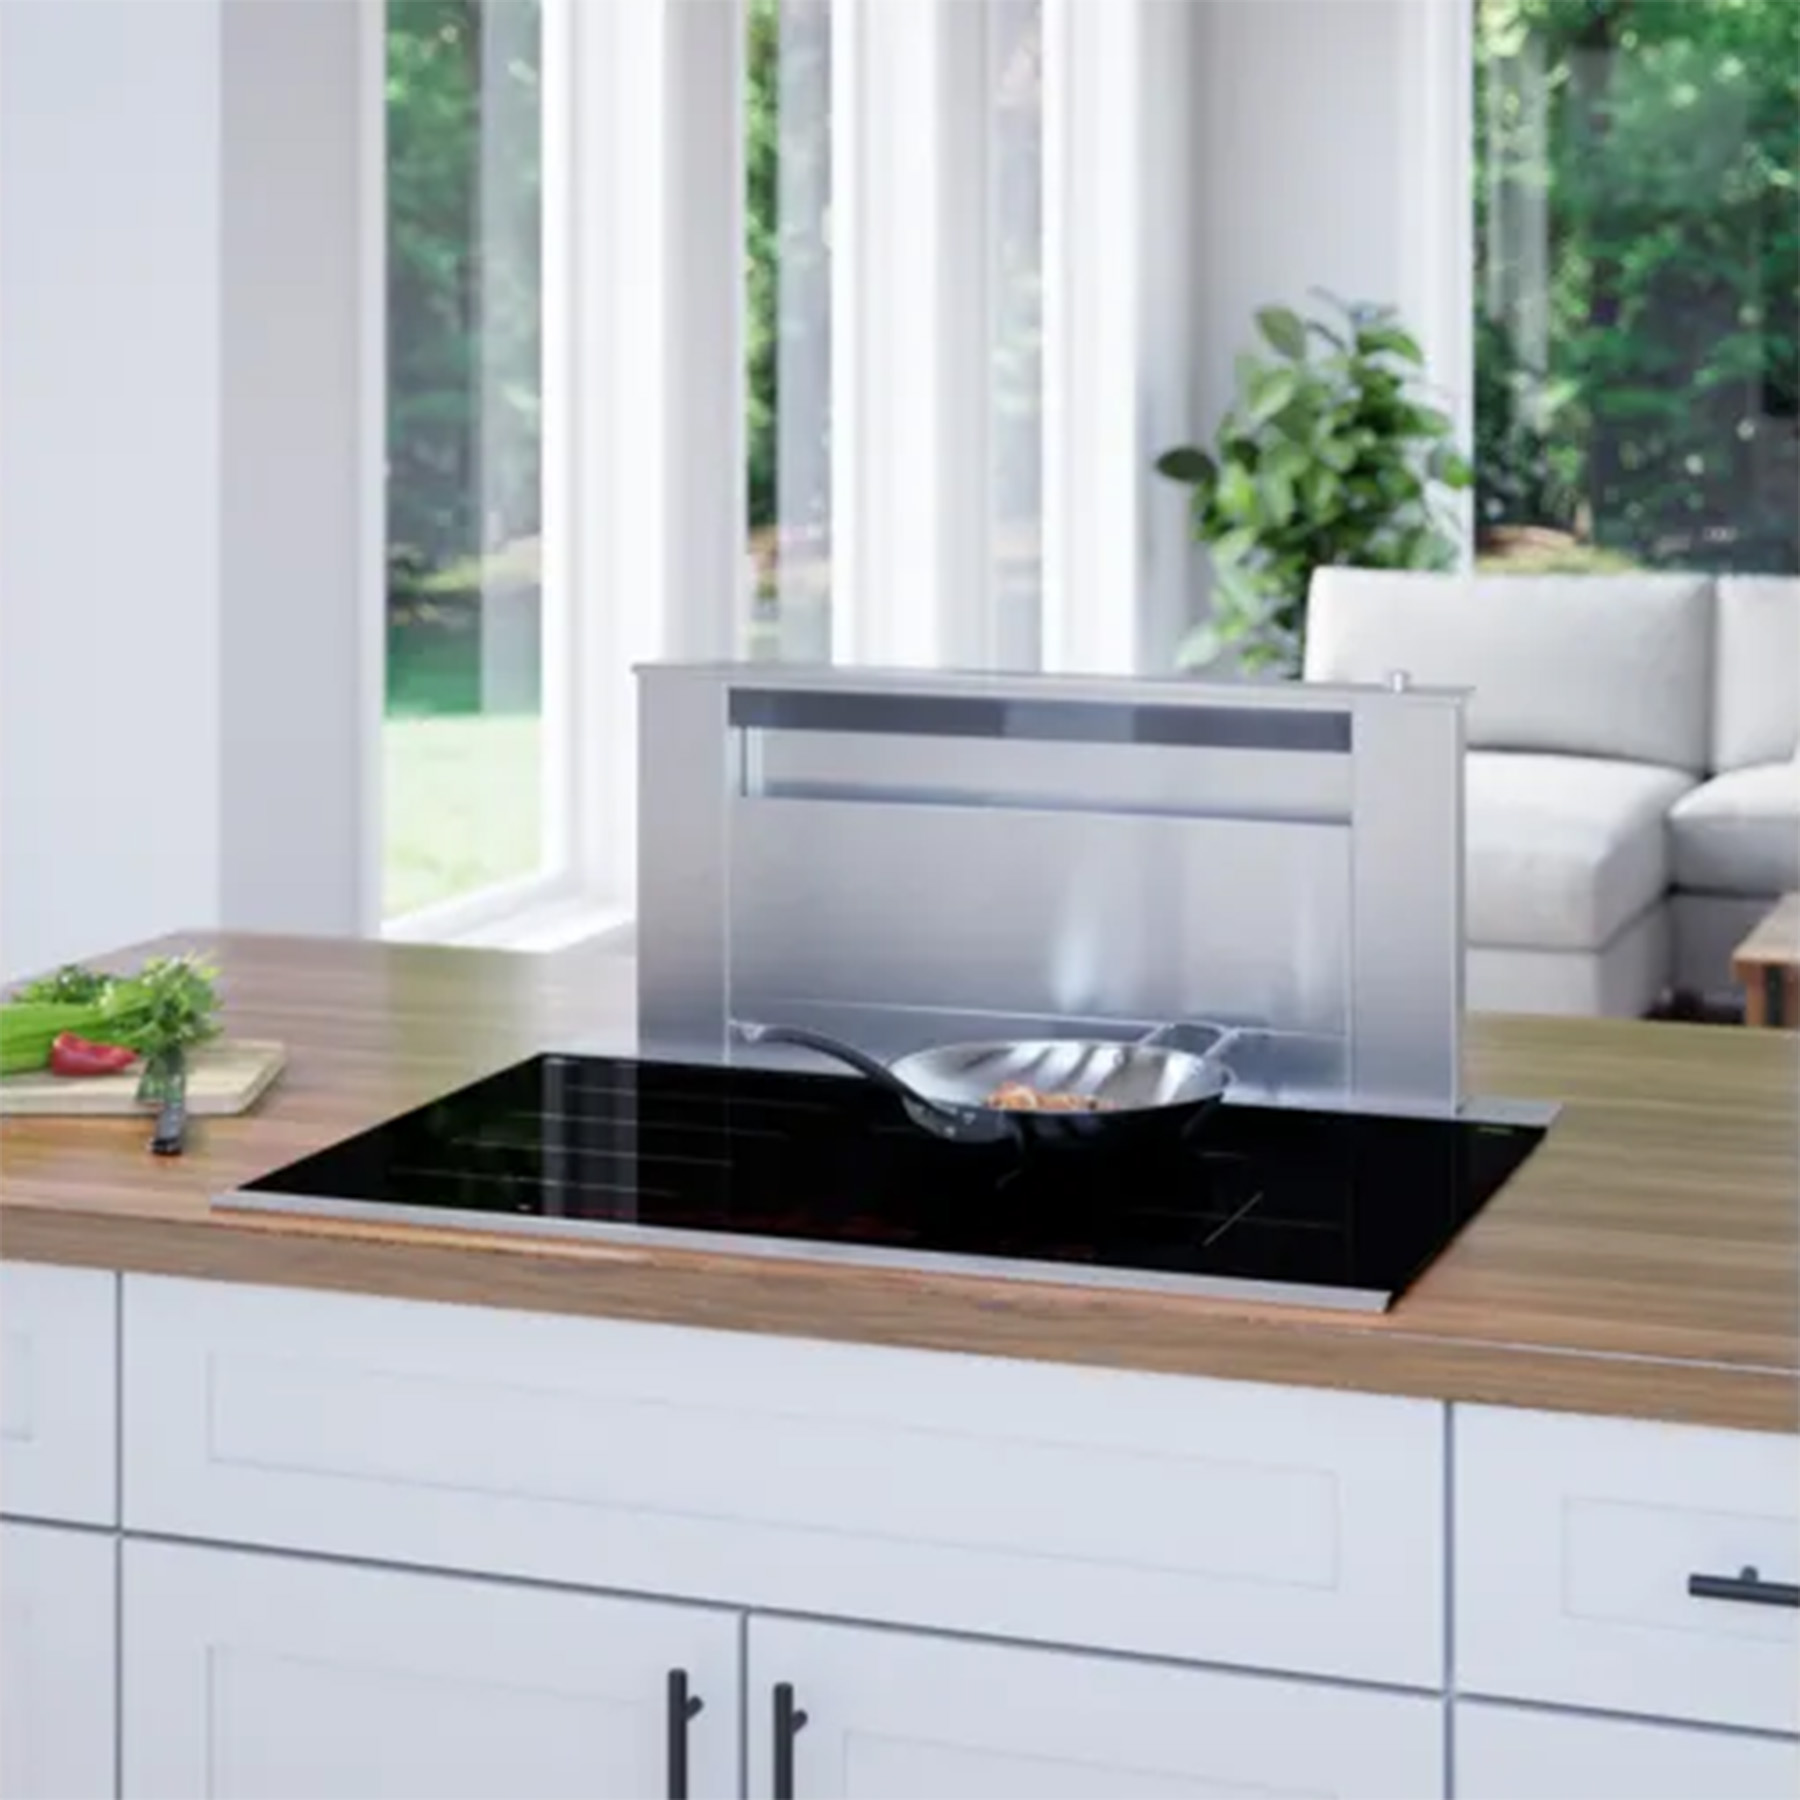 Key Benefits of Bosch Induction Cooktops 3